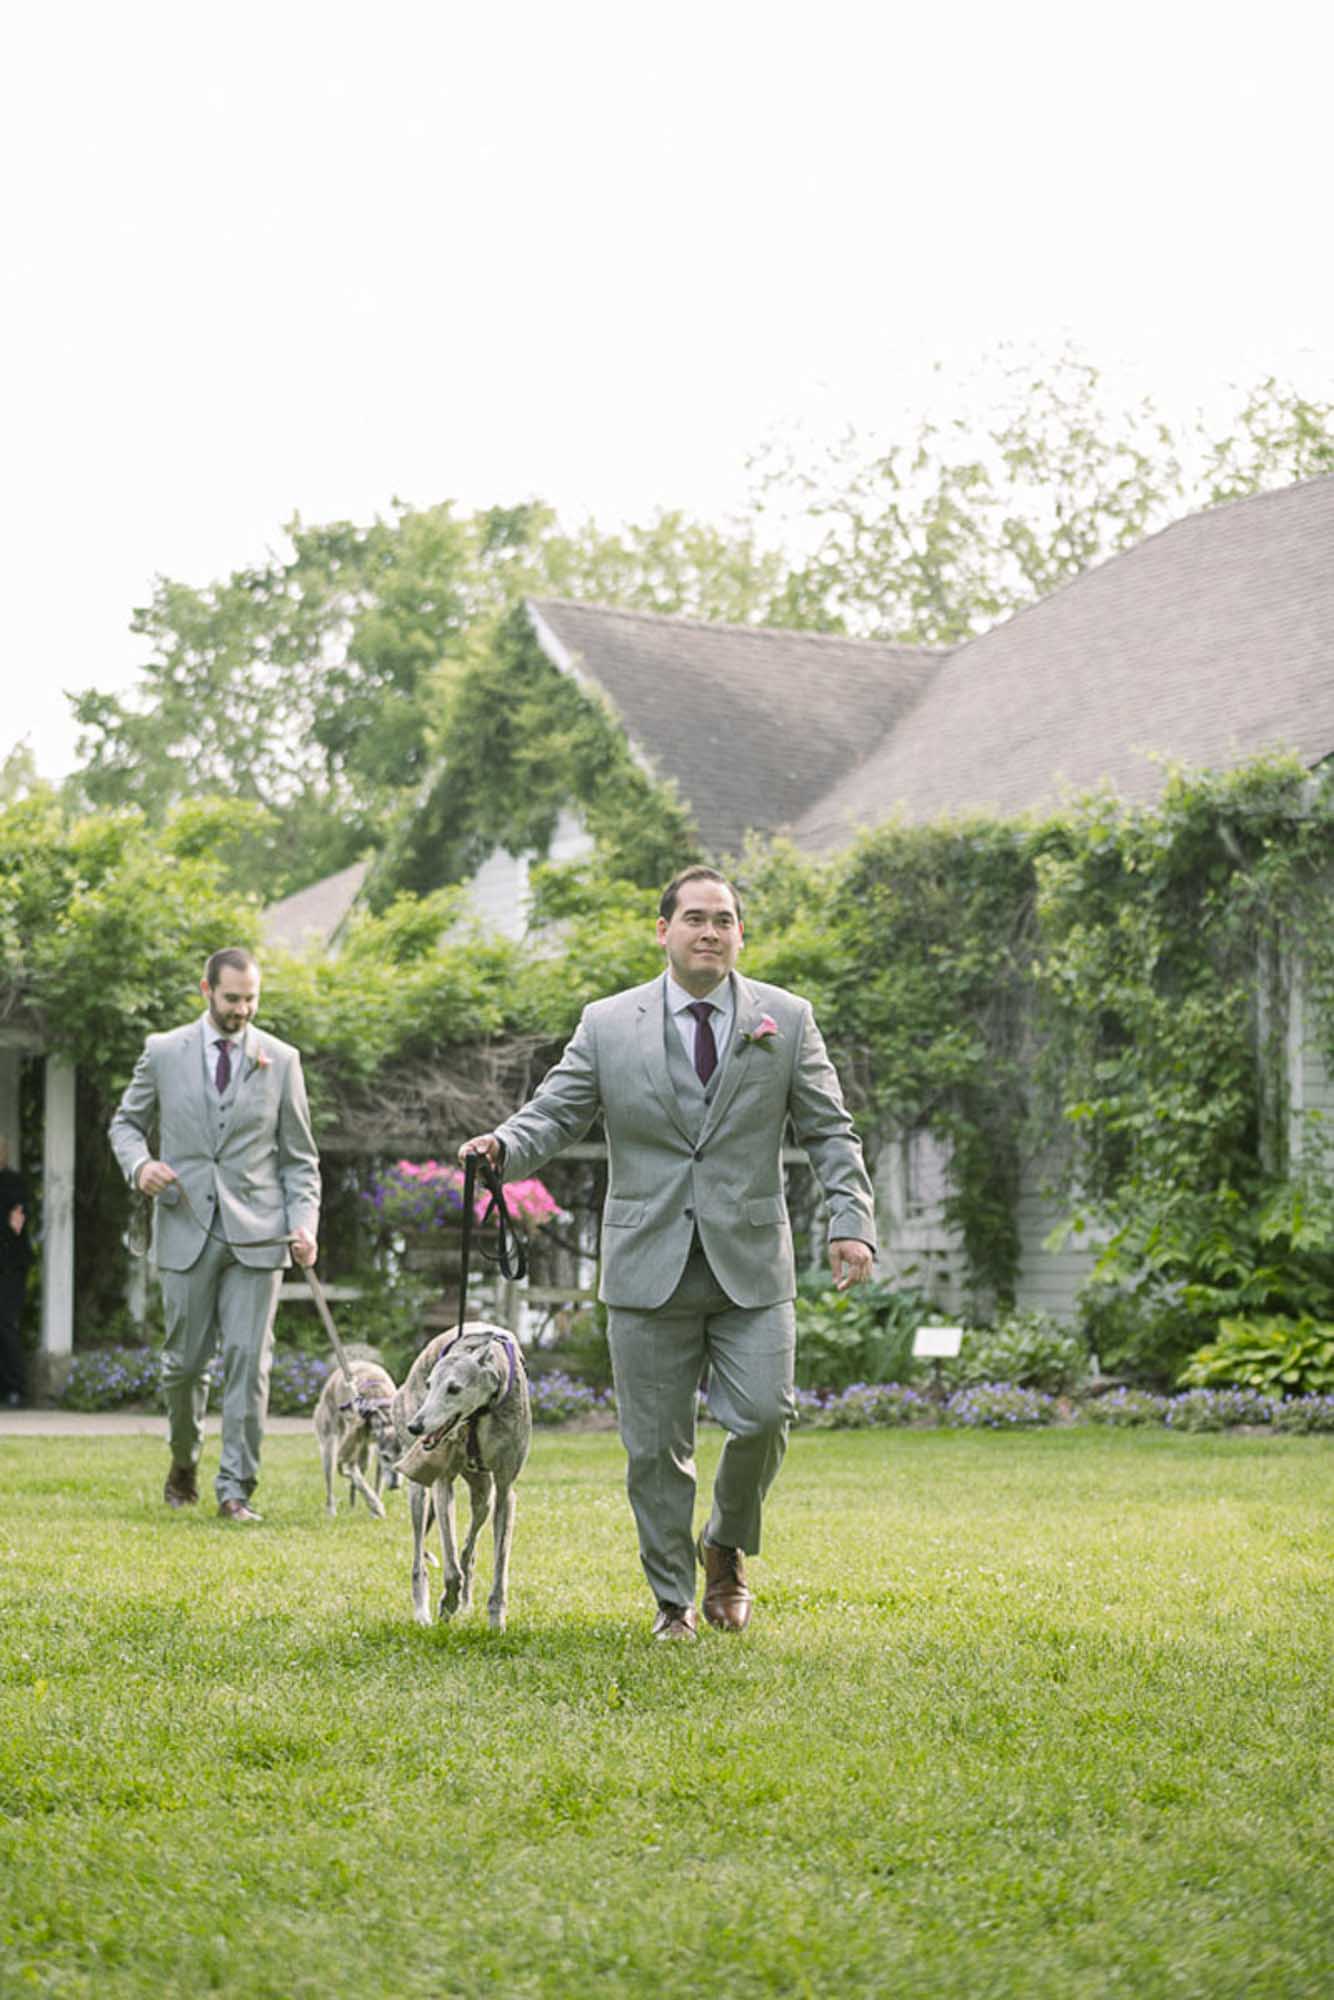 dog in wedding LGBTQ+ wedding featured on Equally Wed magazine with two grooms Brian + Brett: Hudson Valley garden wedding with shades of purple Upasana Mainali Photography outdoor wedding ceremony